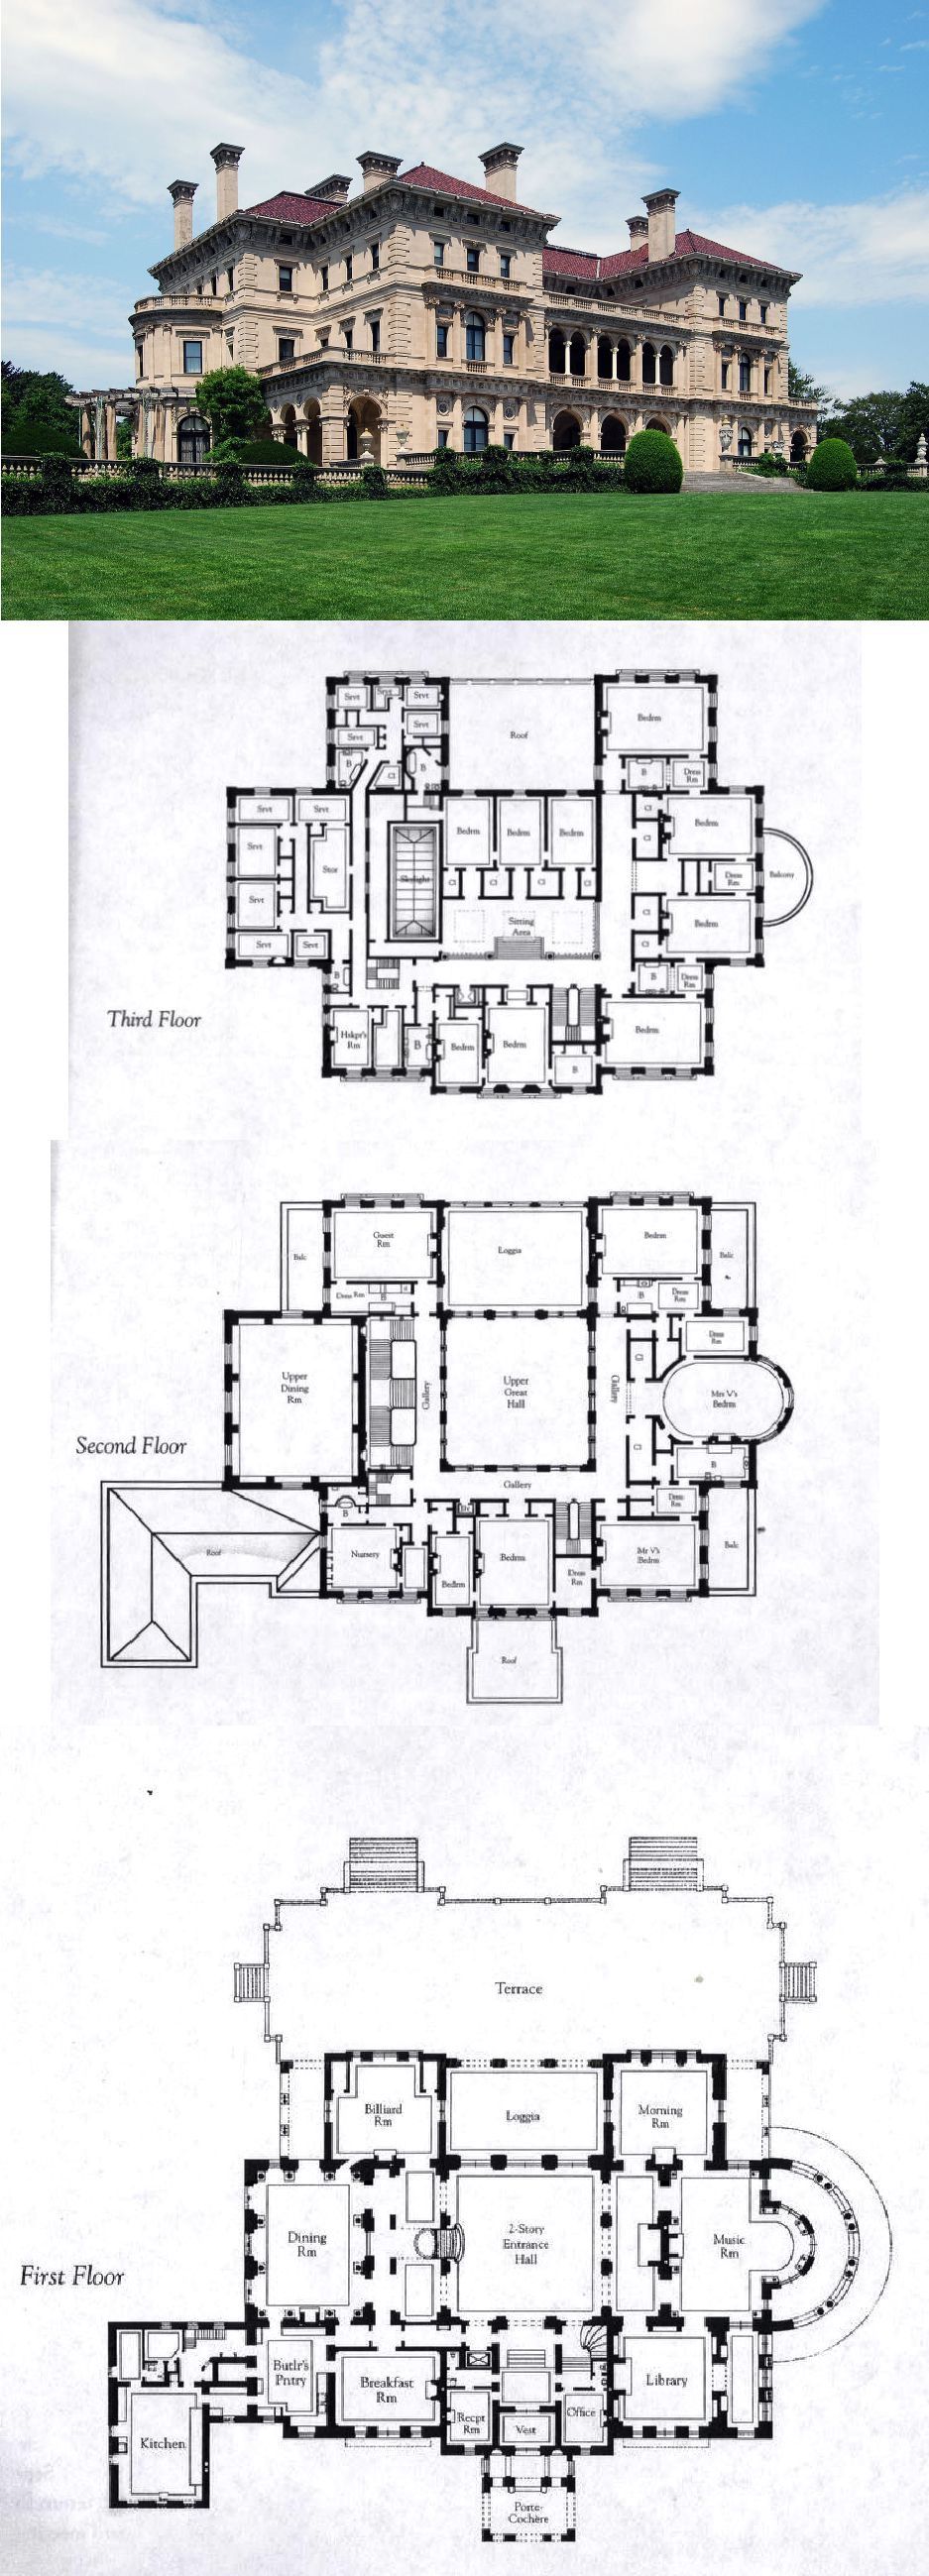 Floorplans for Gilded Age Mansions. SkyscraperPage Forum